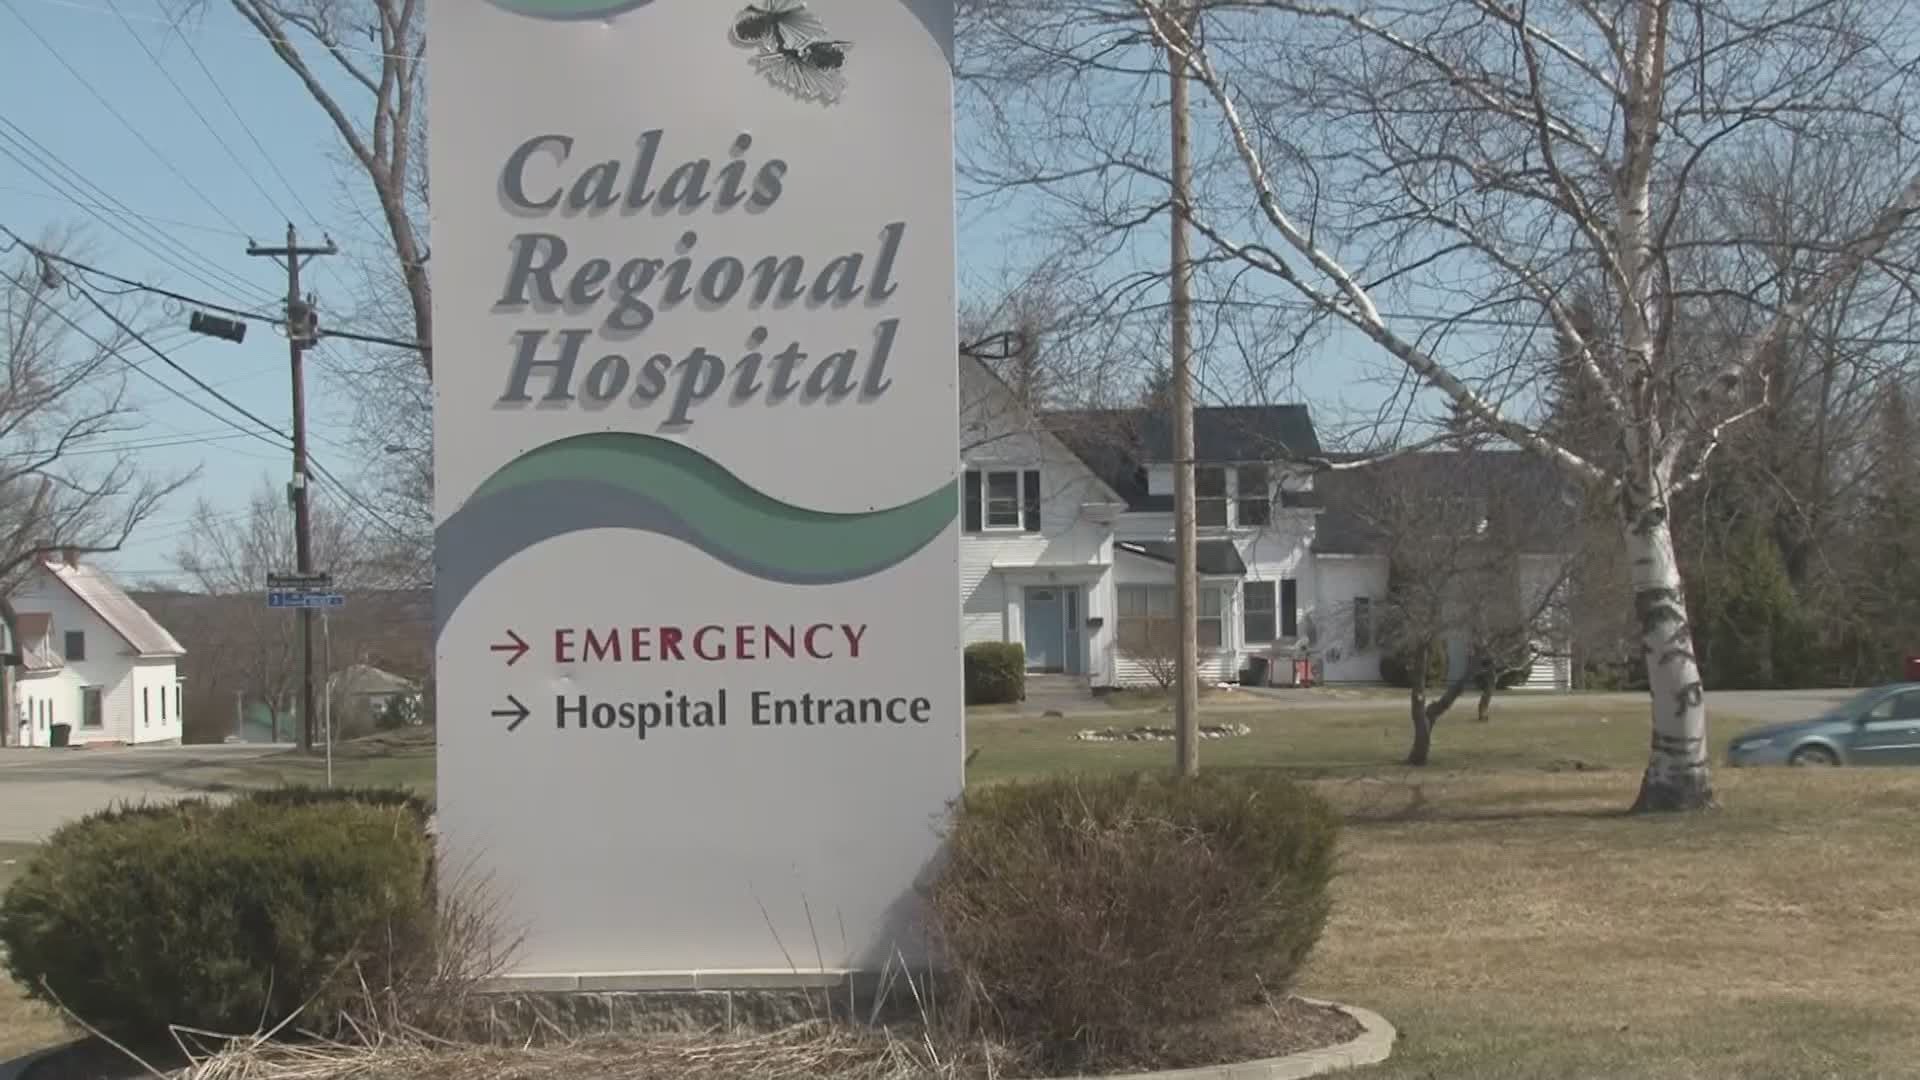 The Hospital in Calais filed bankruptcy in 2019 and has continued to provide medical services. With two independent hospitals combining, hopefully they can expand.